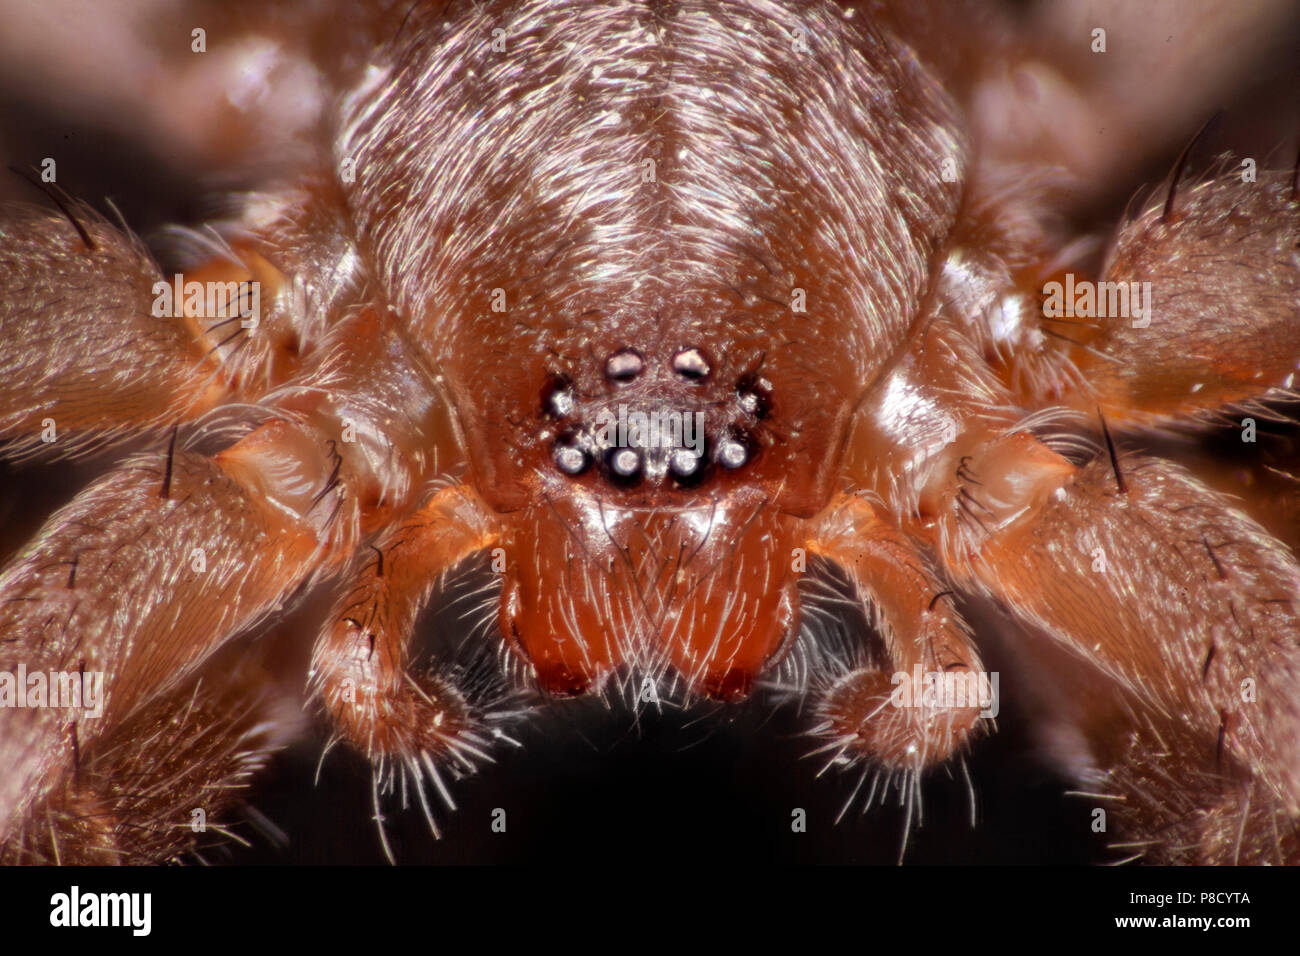 Spider, Drassodes sp.close-up showing prominent eyes Stock Photo